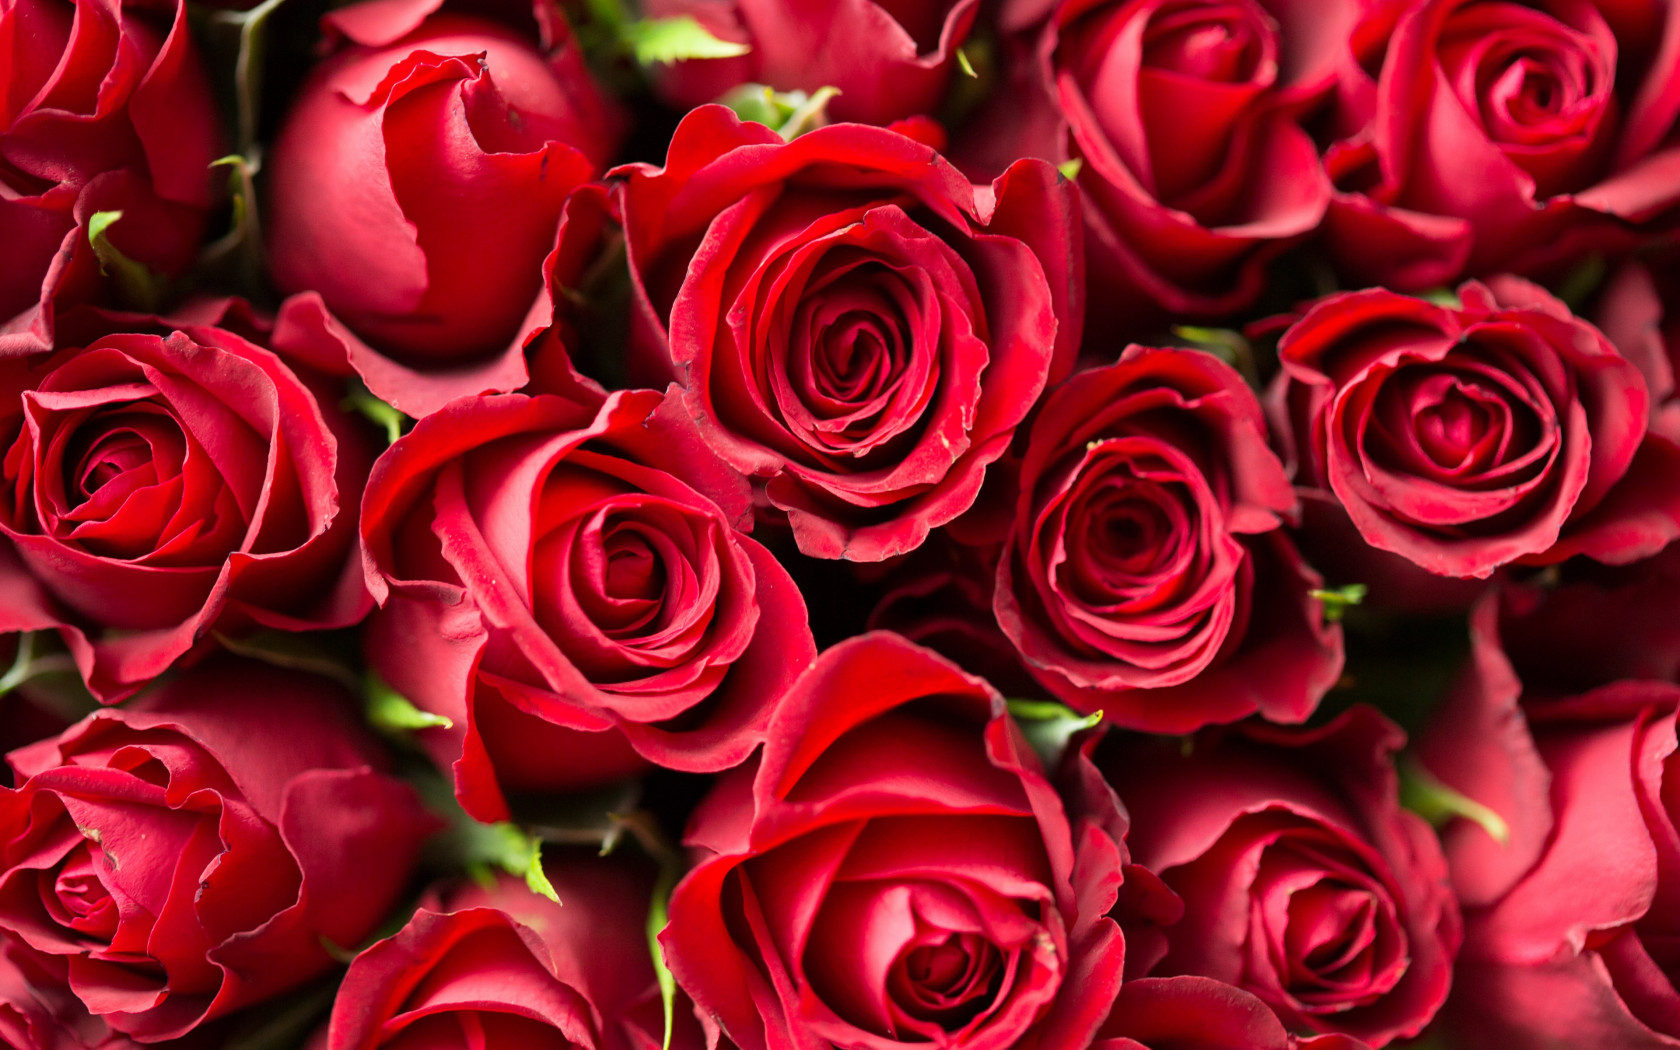 Lots of red roses wallpaper 1680x1050